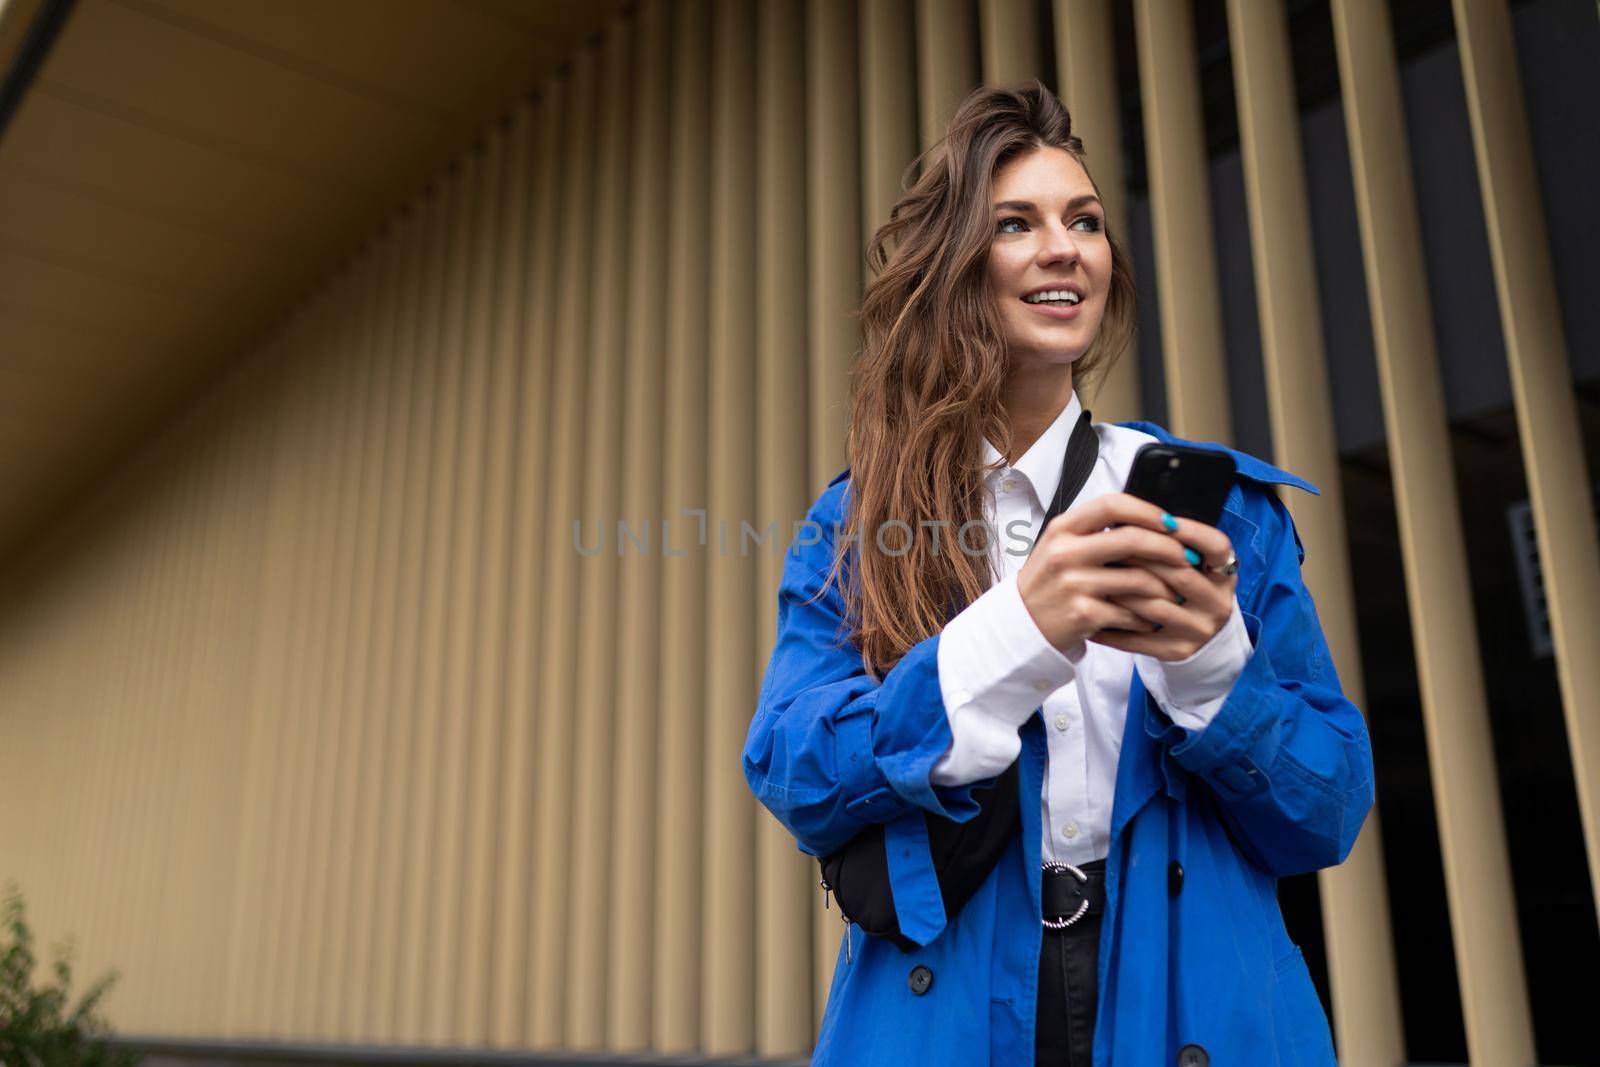 young female student with a mobile phone looking into the distance with a smile against the background of golden vertical stripes.